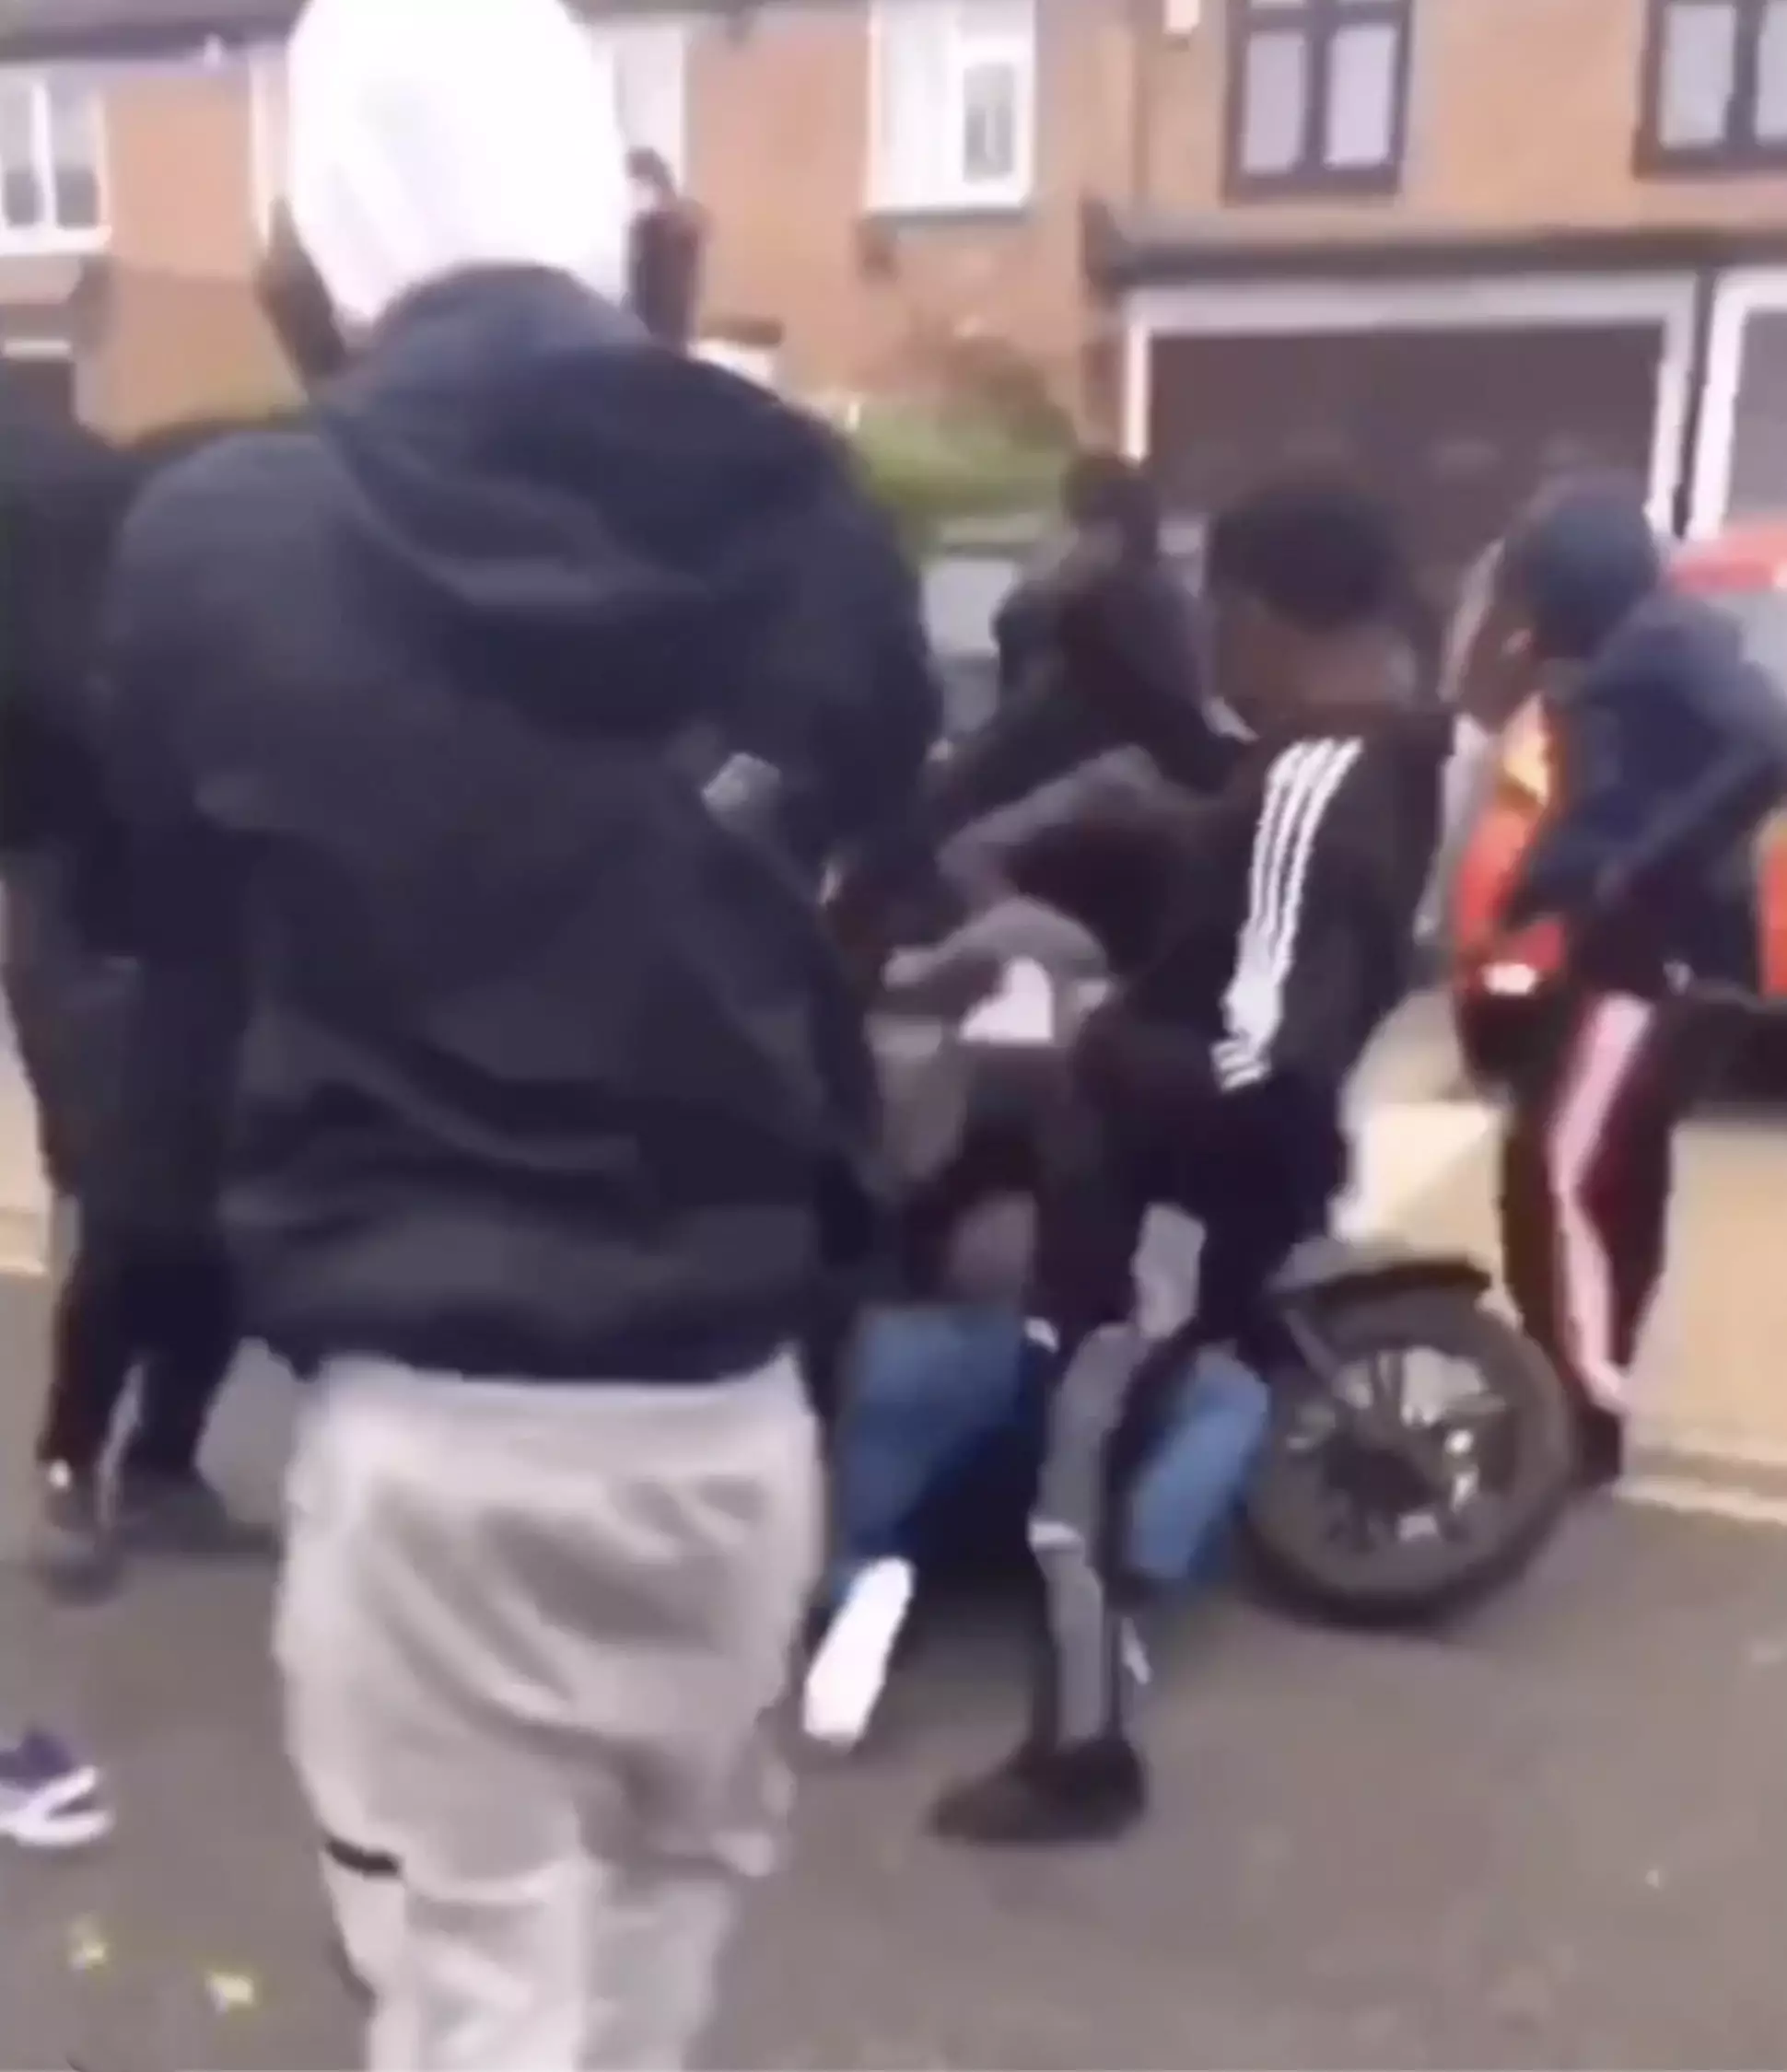 The driver is knocked to the floor before being kicked in the head by the gang.